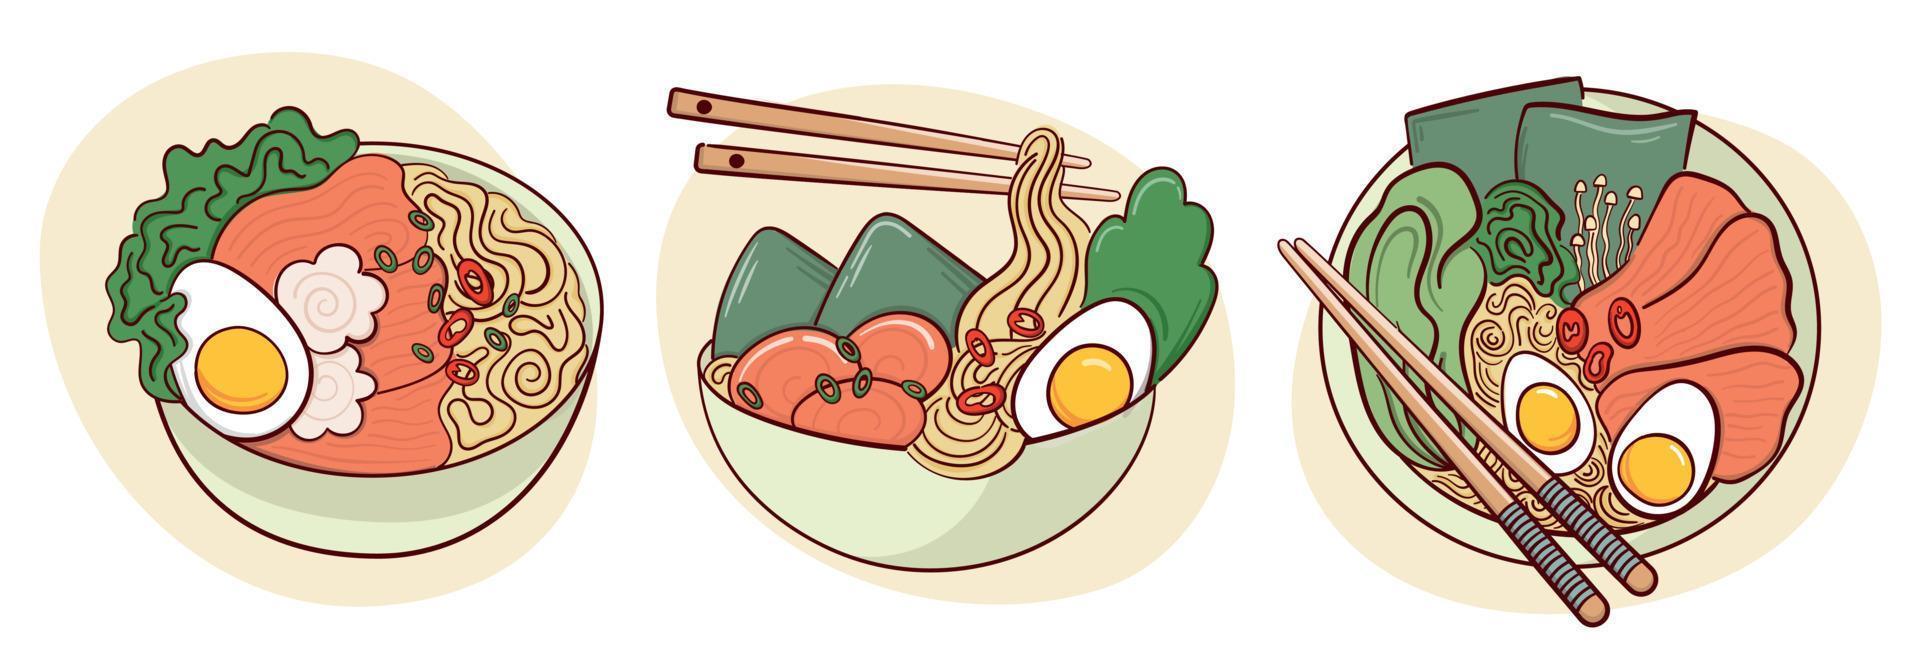 Draw ramen soup in a bowl vector illustration. Japanese asian traditional  food, cooking, menu concept.  Doodle cartoon style.